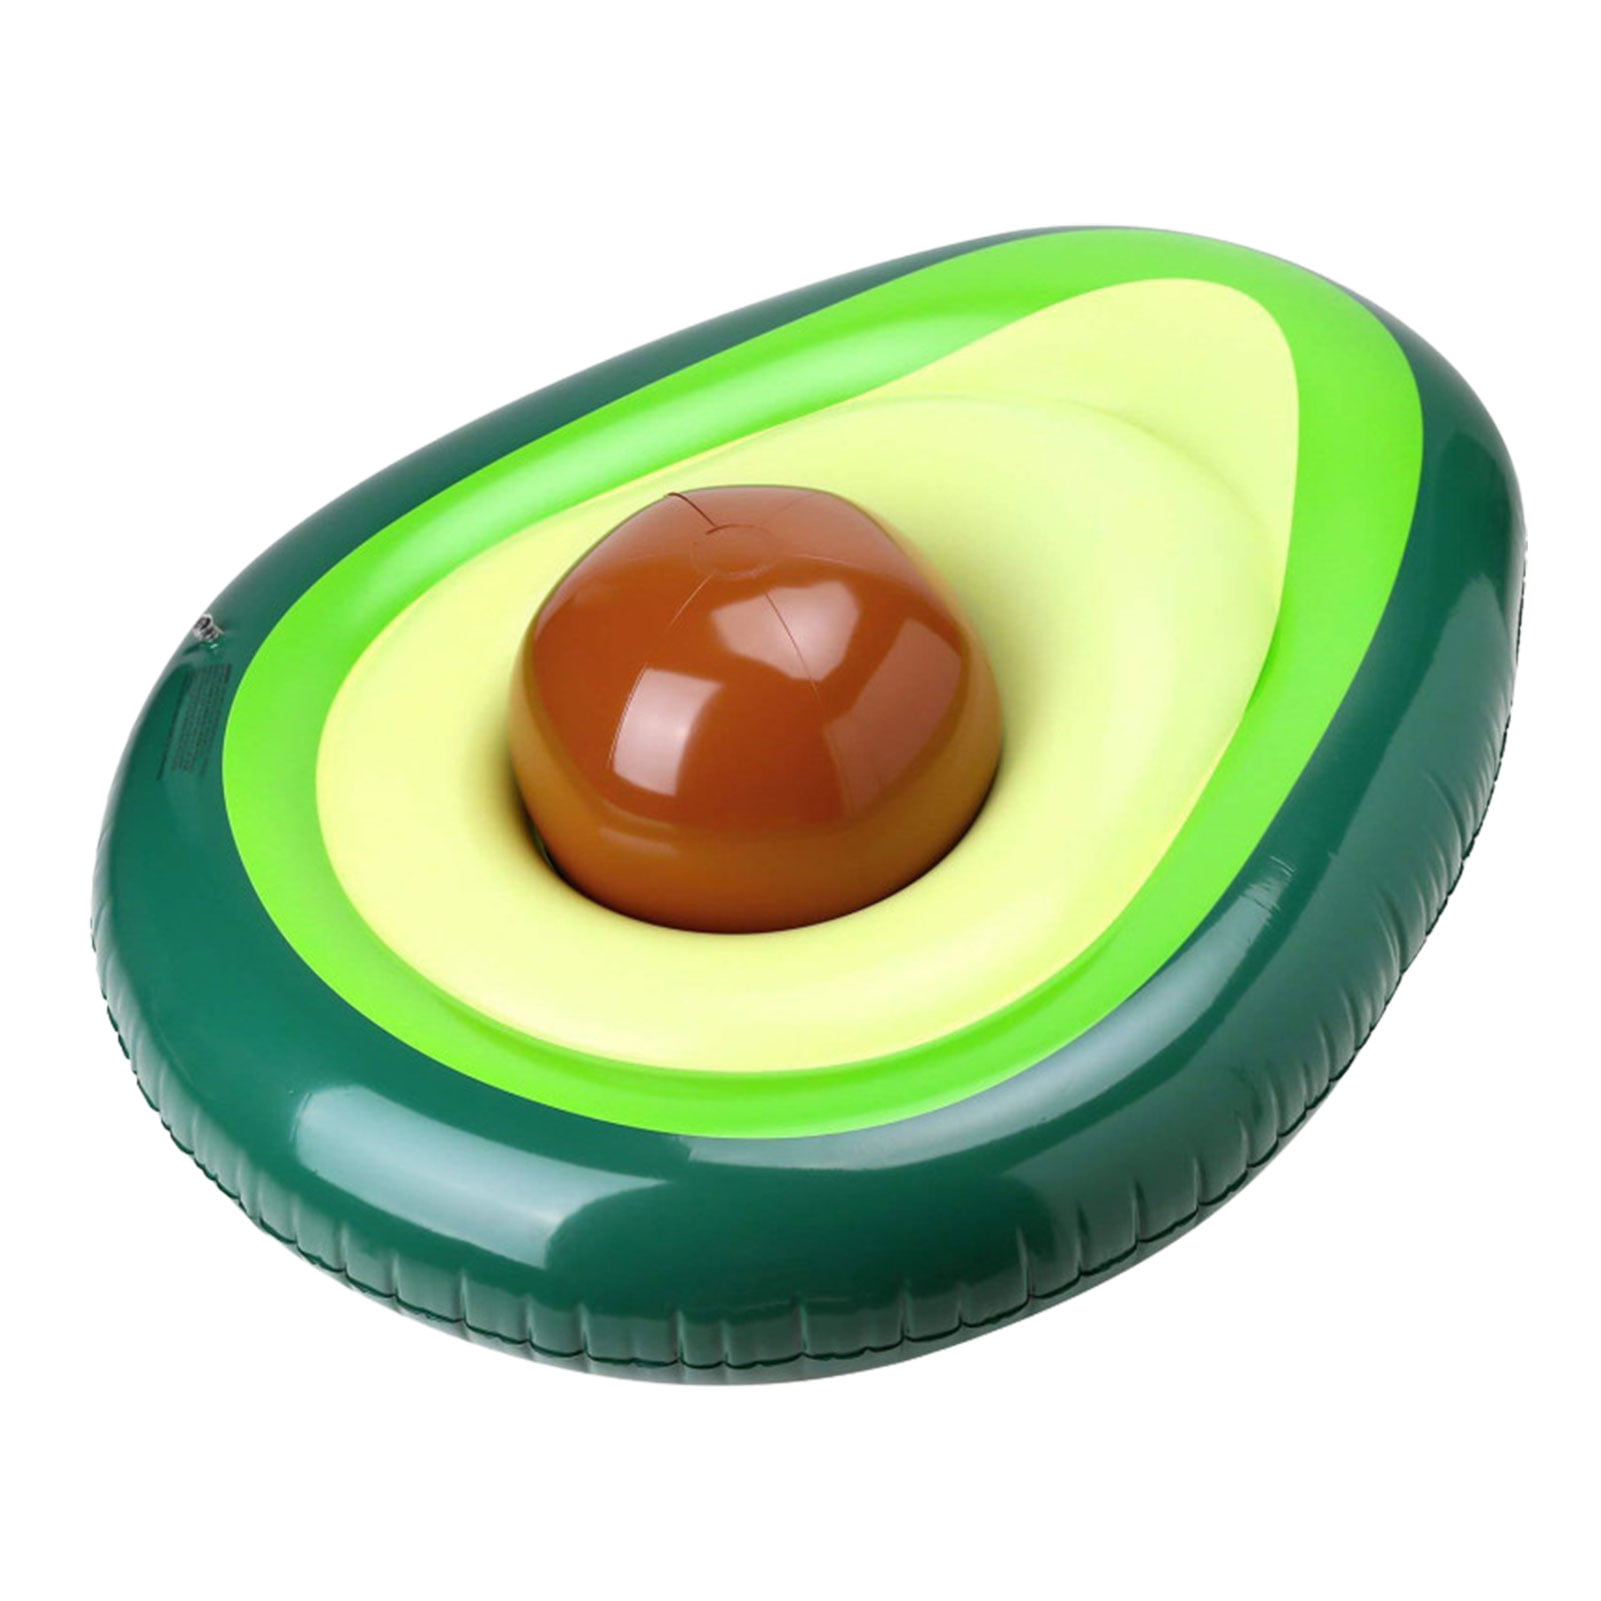 Giant Inflatable Avocado Float Large PVC Swimming Pool Float Toy Beach Lounger 